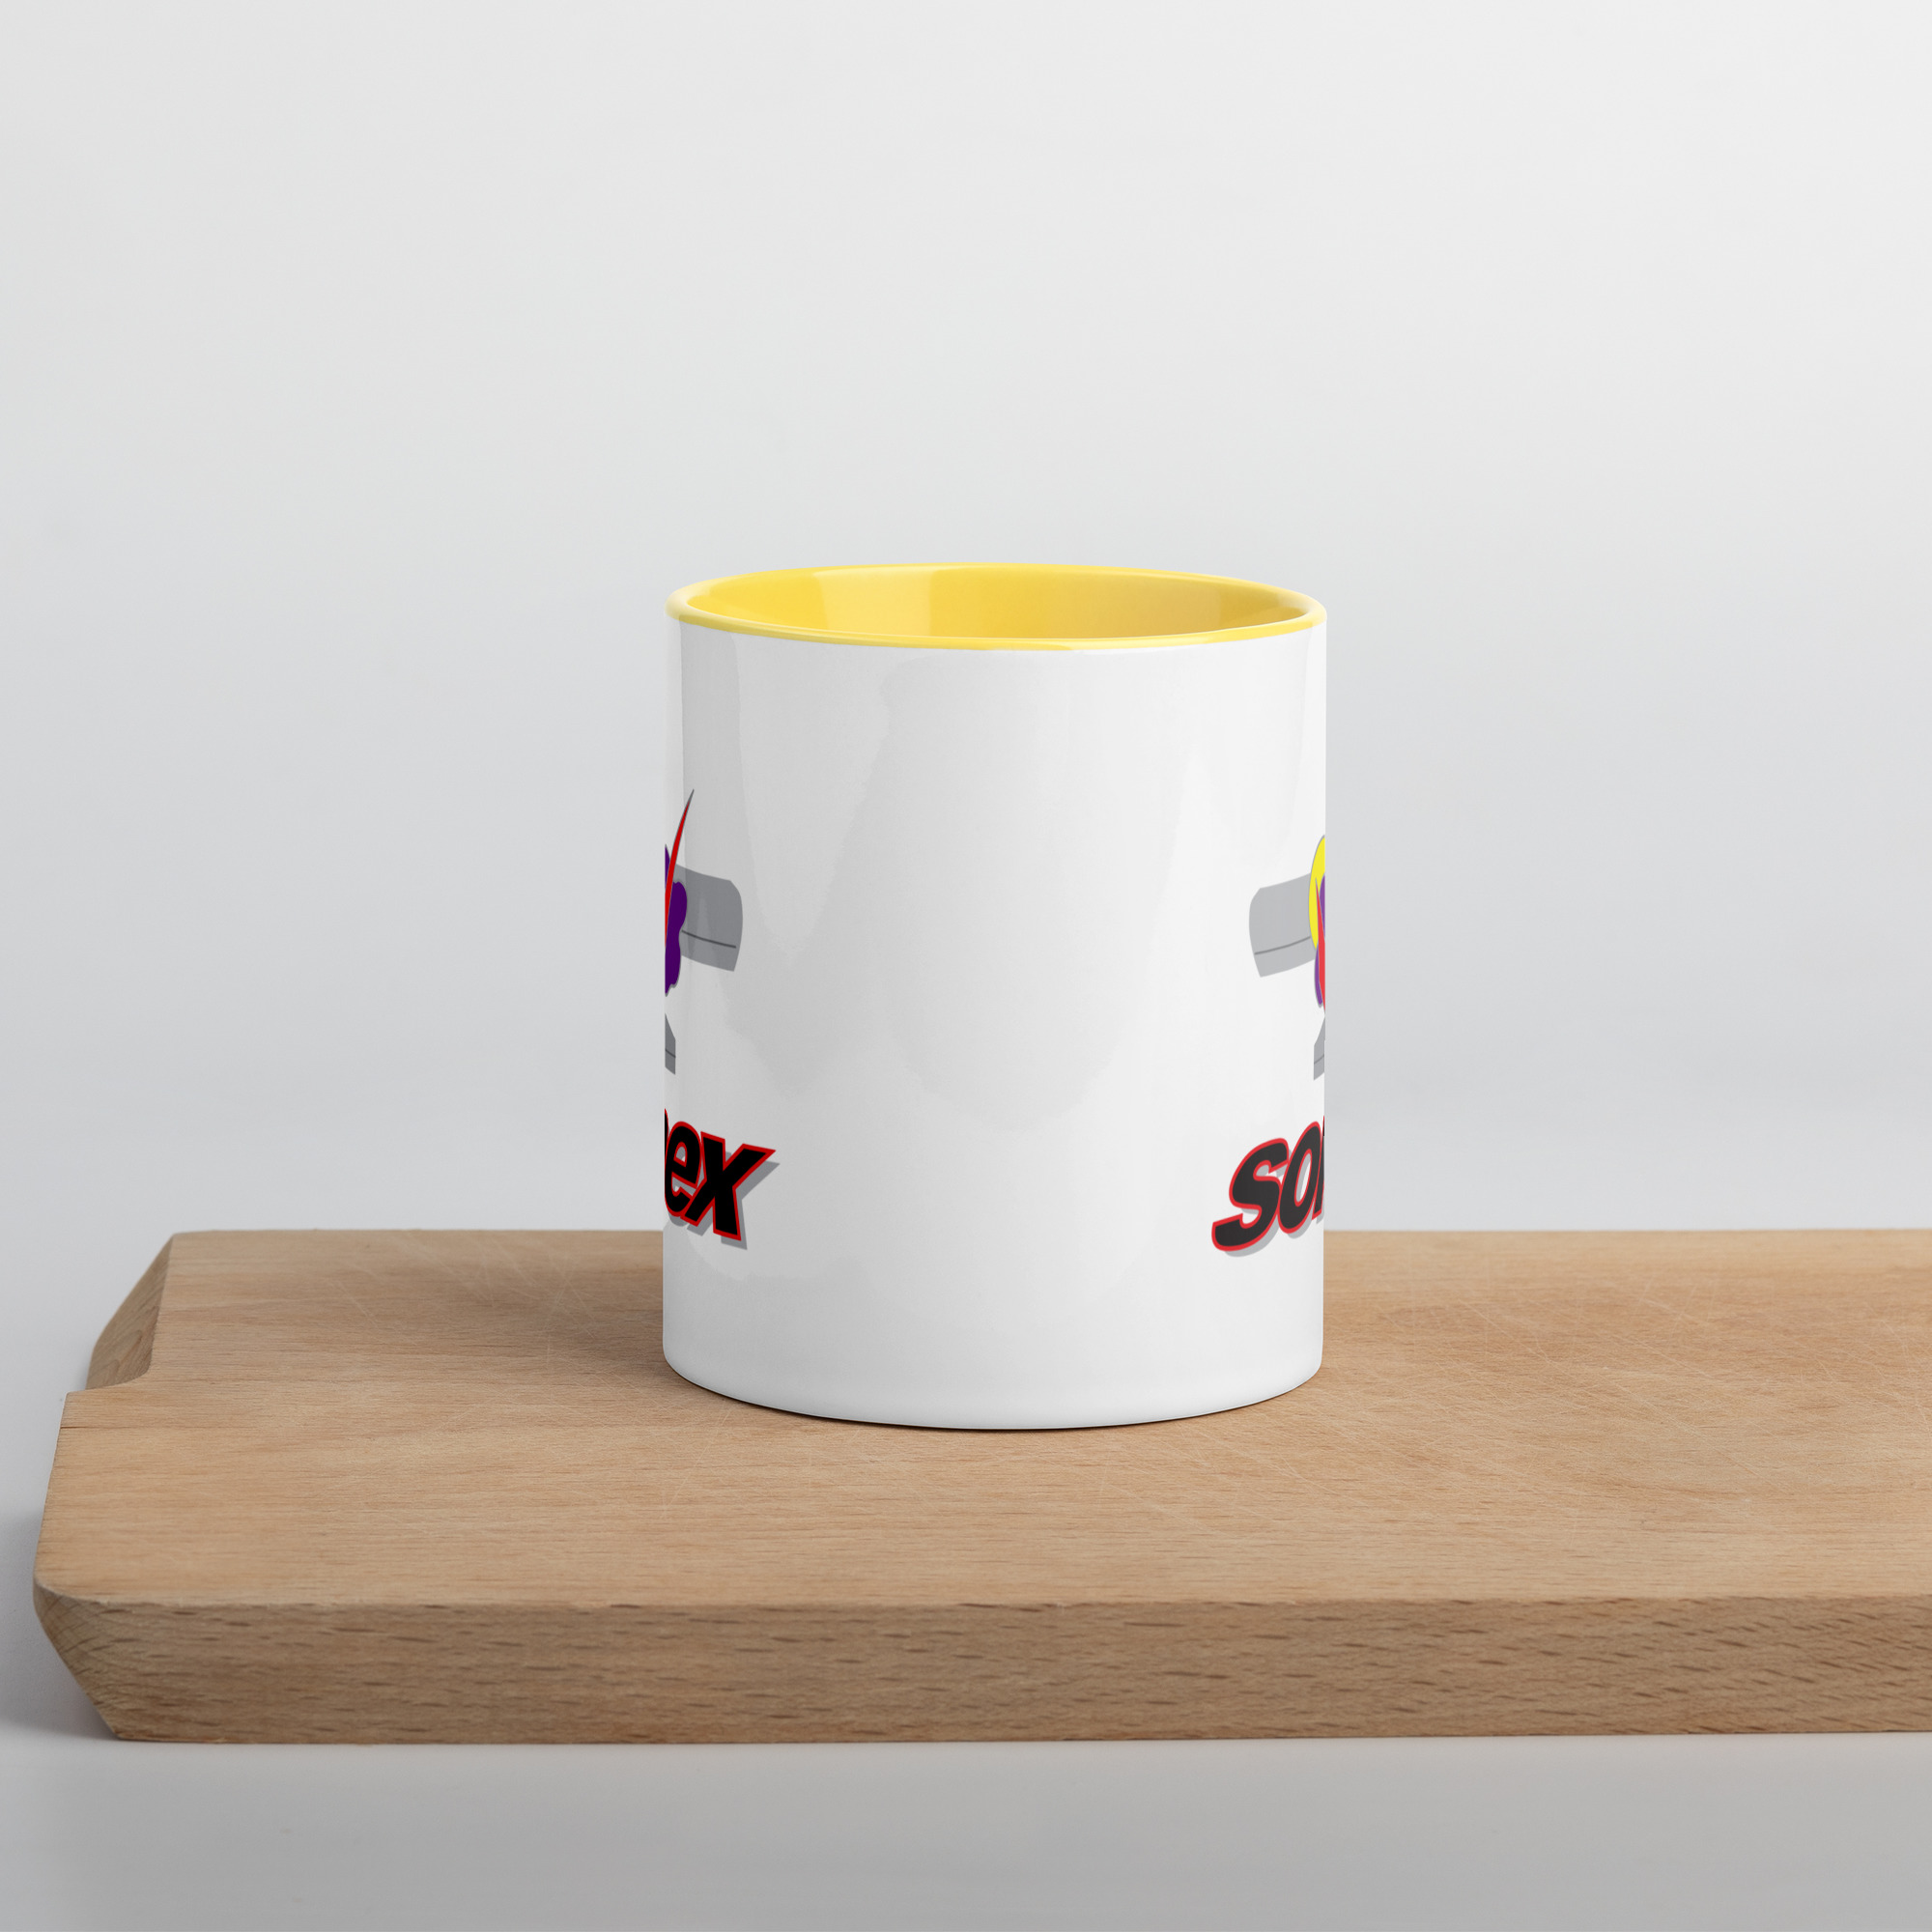 white-ceramic-mug-with-color-inside-yellow-11-oz-front-656108955f003.jpg